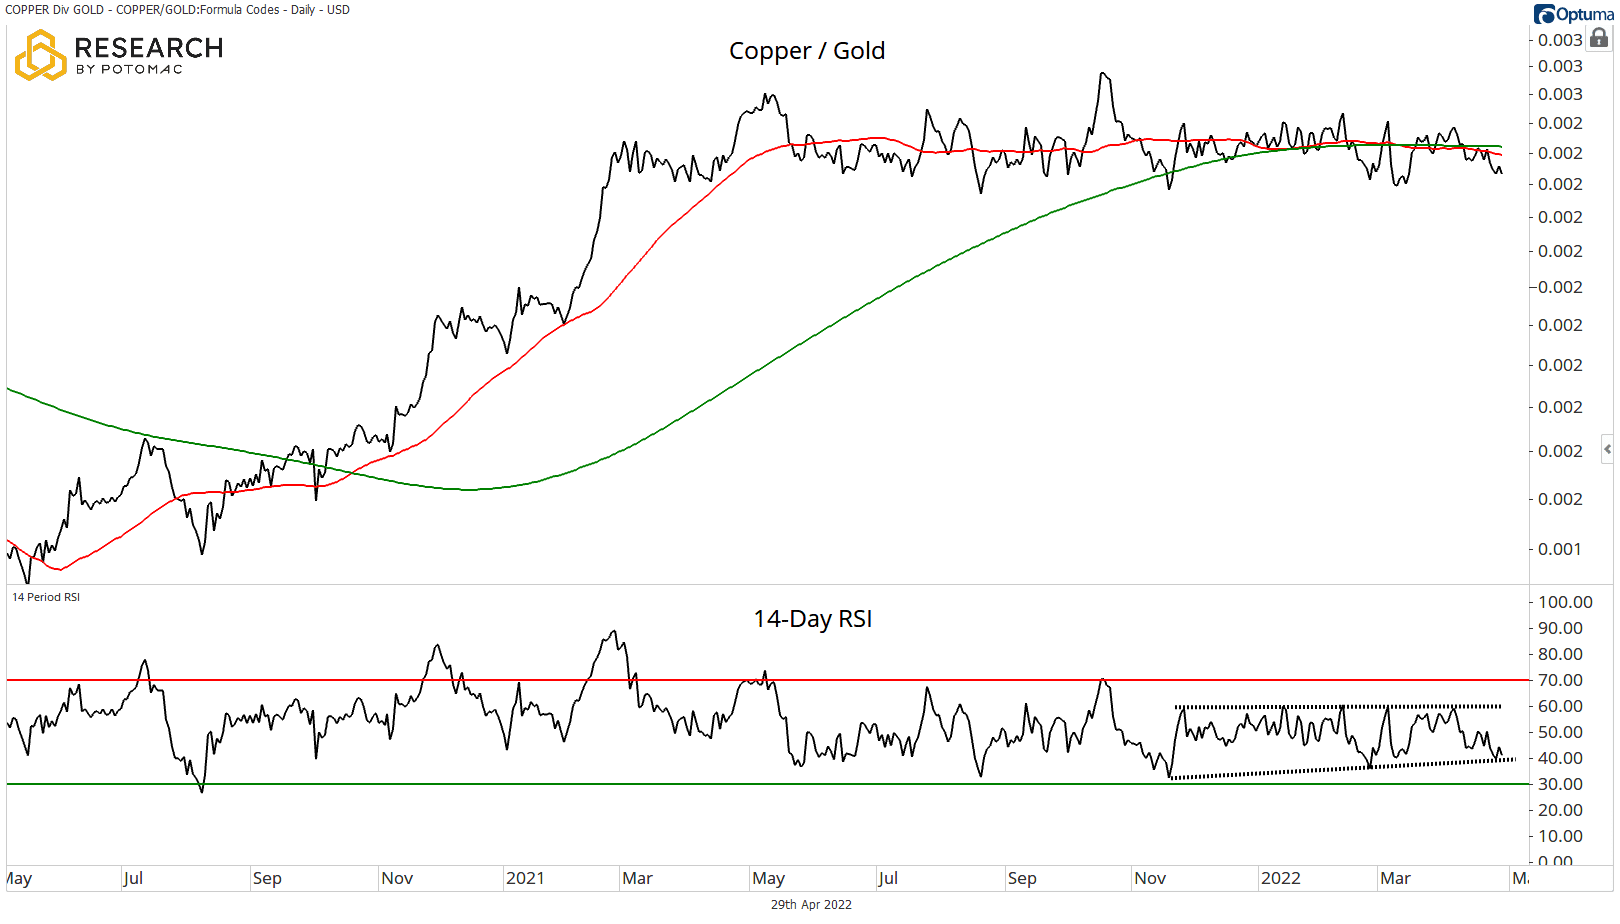 Copper / Gold chart for April 29th research.